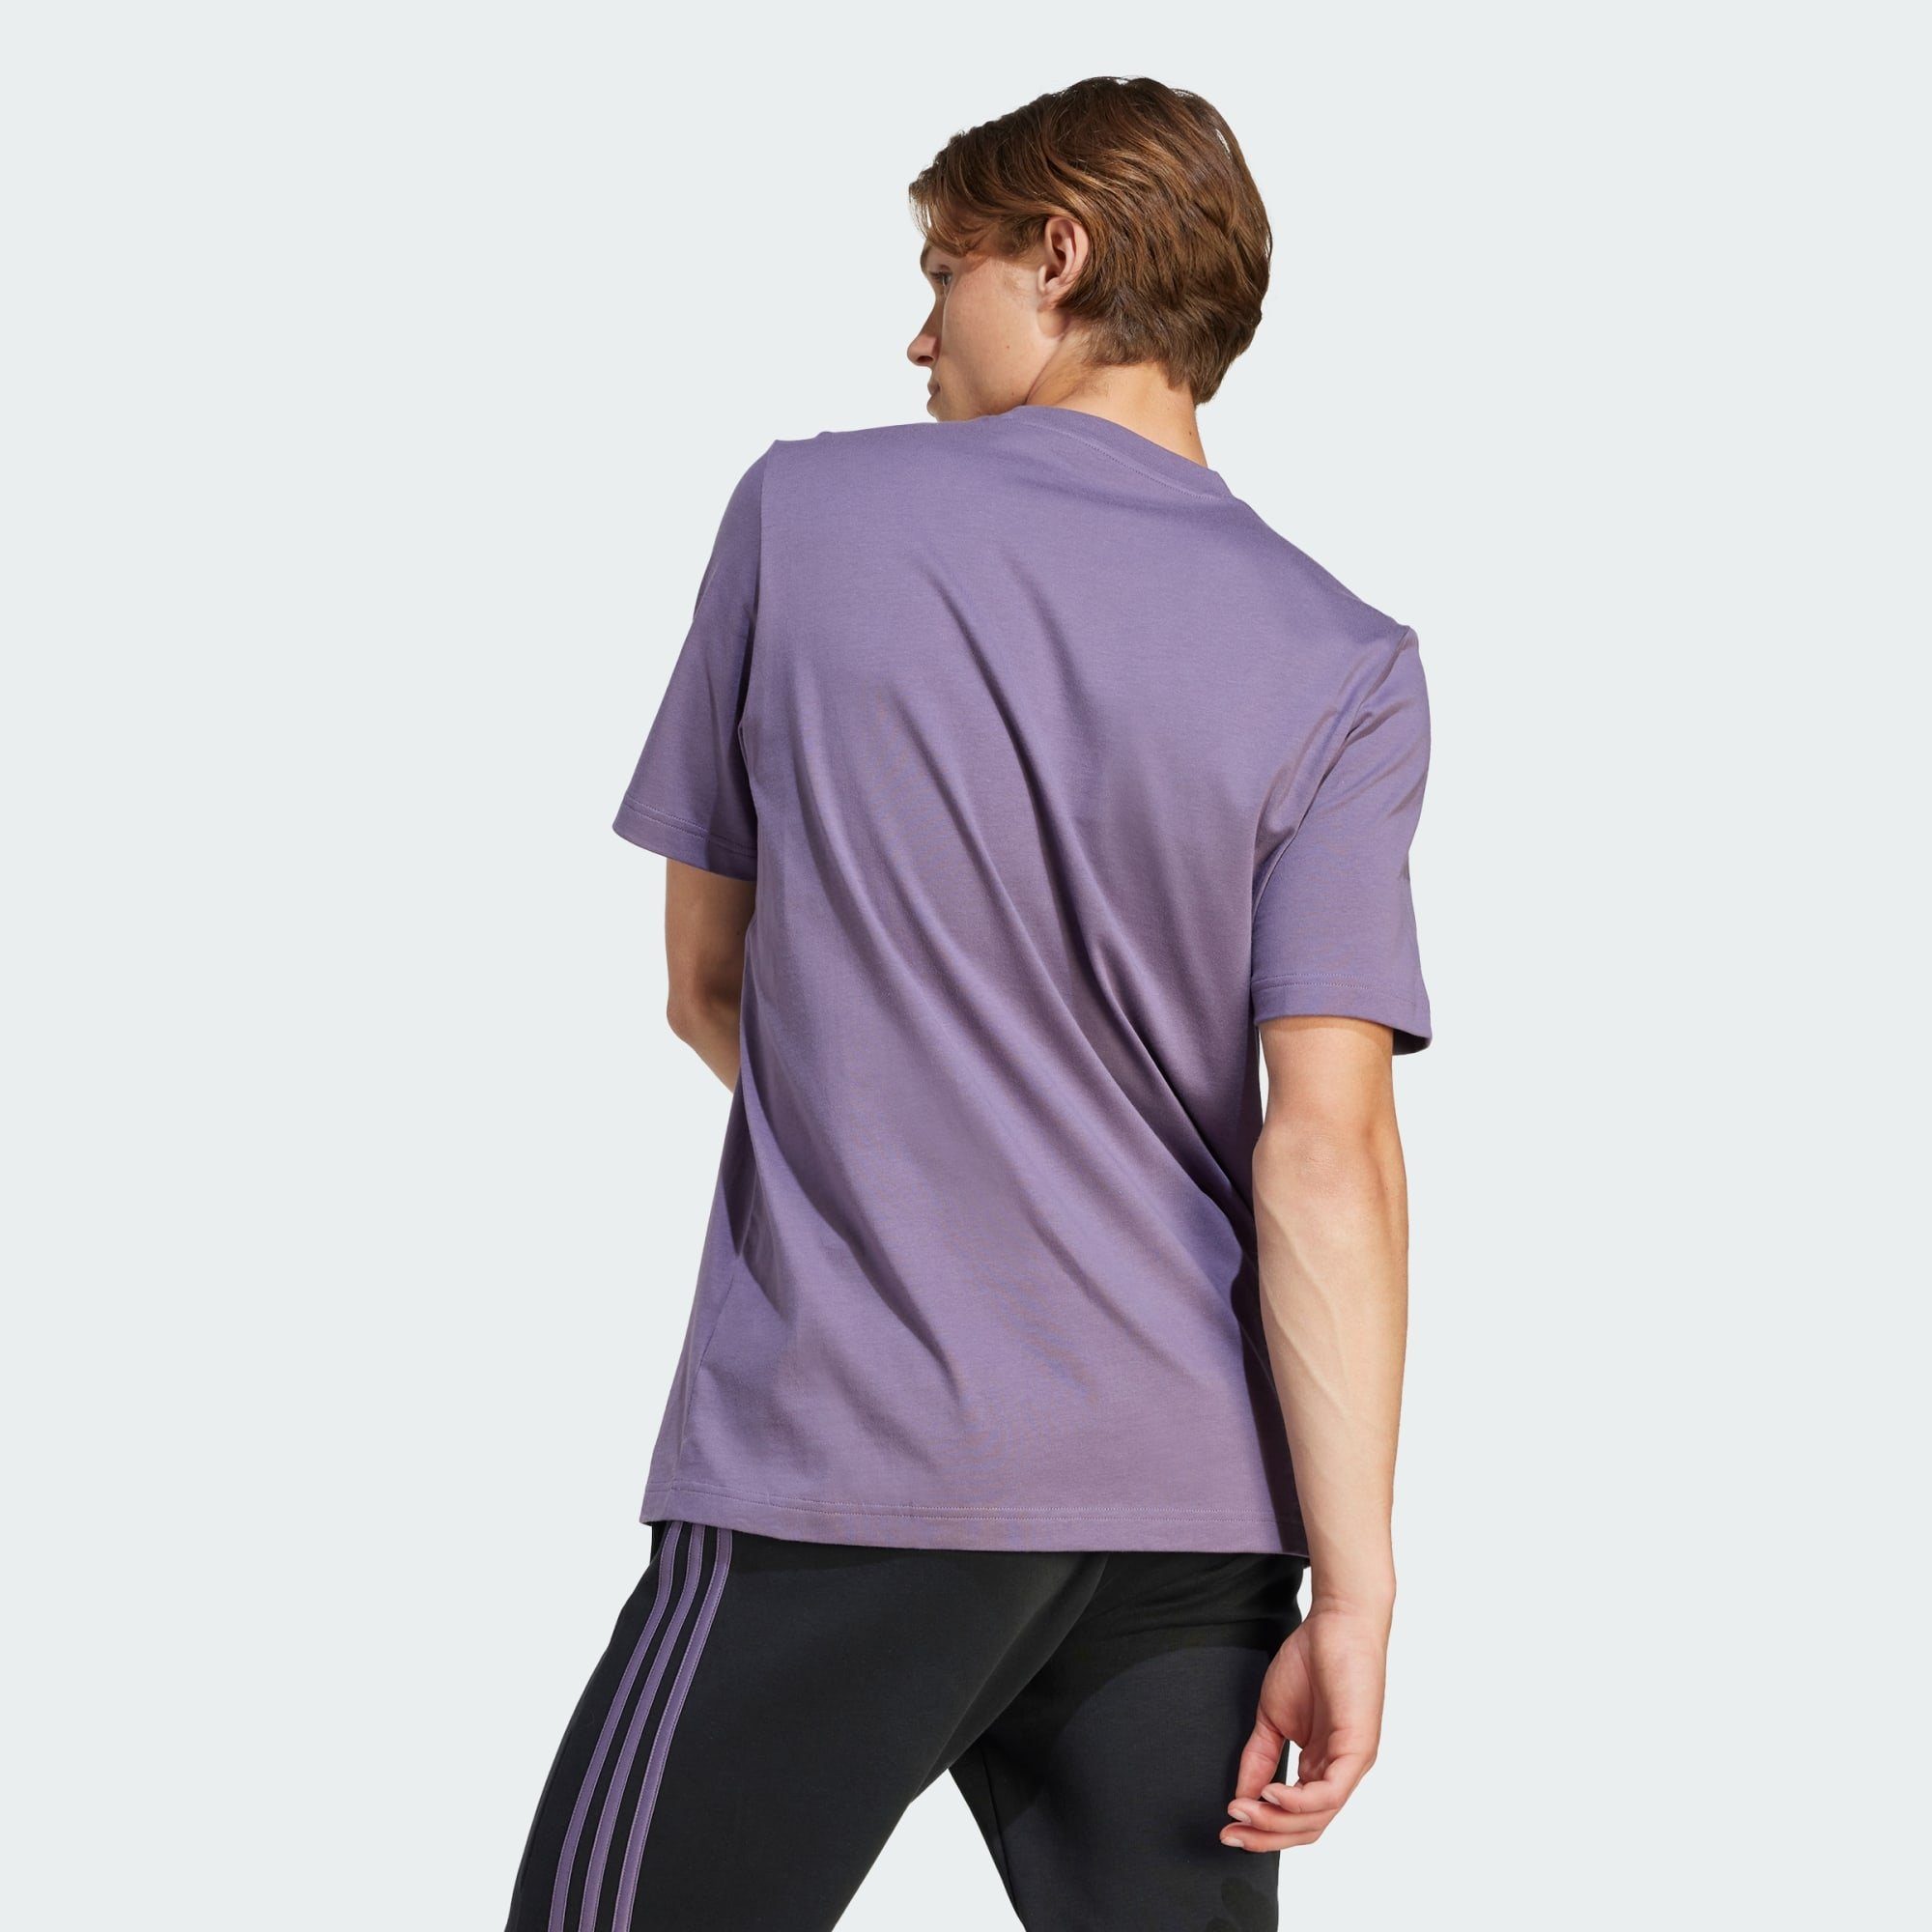 adidas Sportswear T-Shirt ADIDAS SPORTSWEAR T-SHIRT AUGMENTED